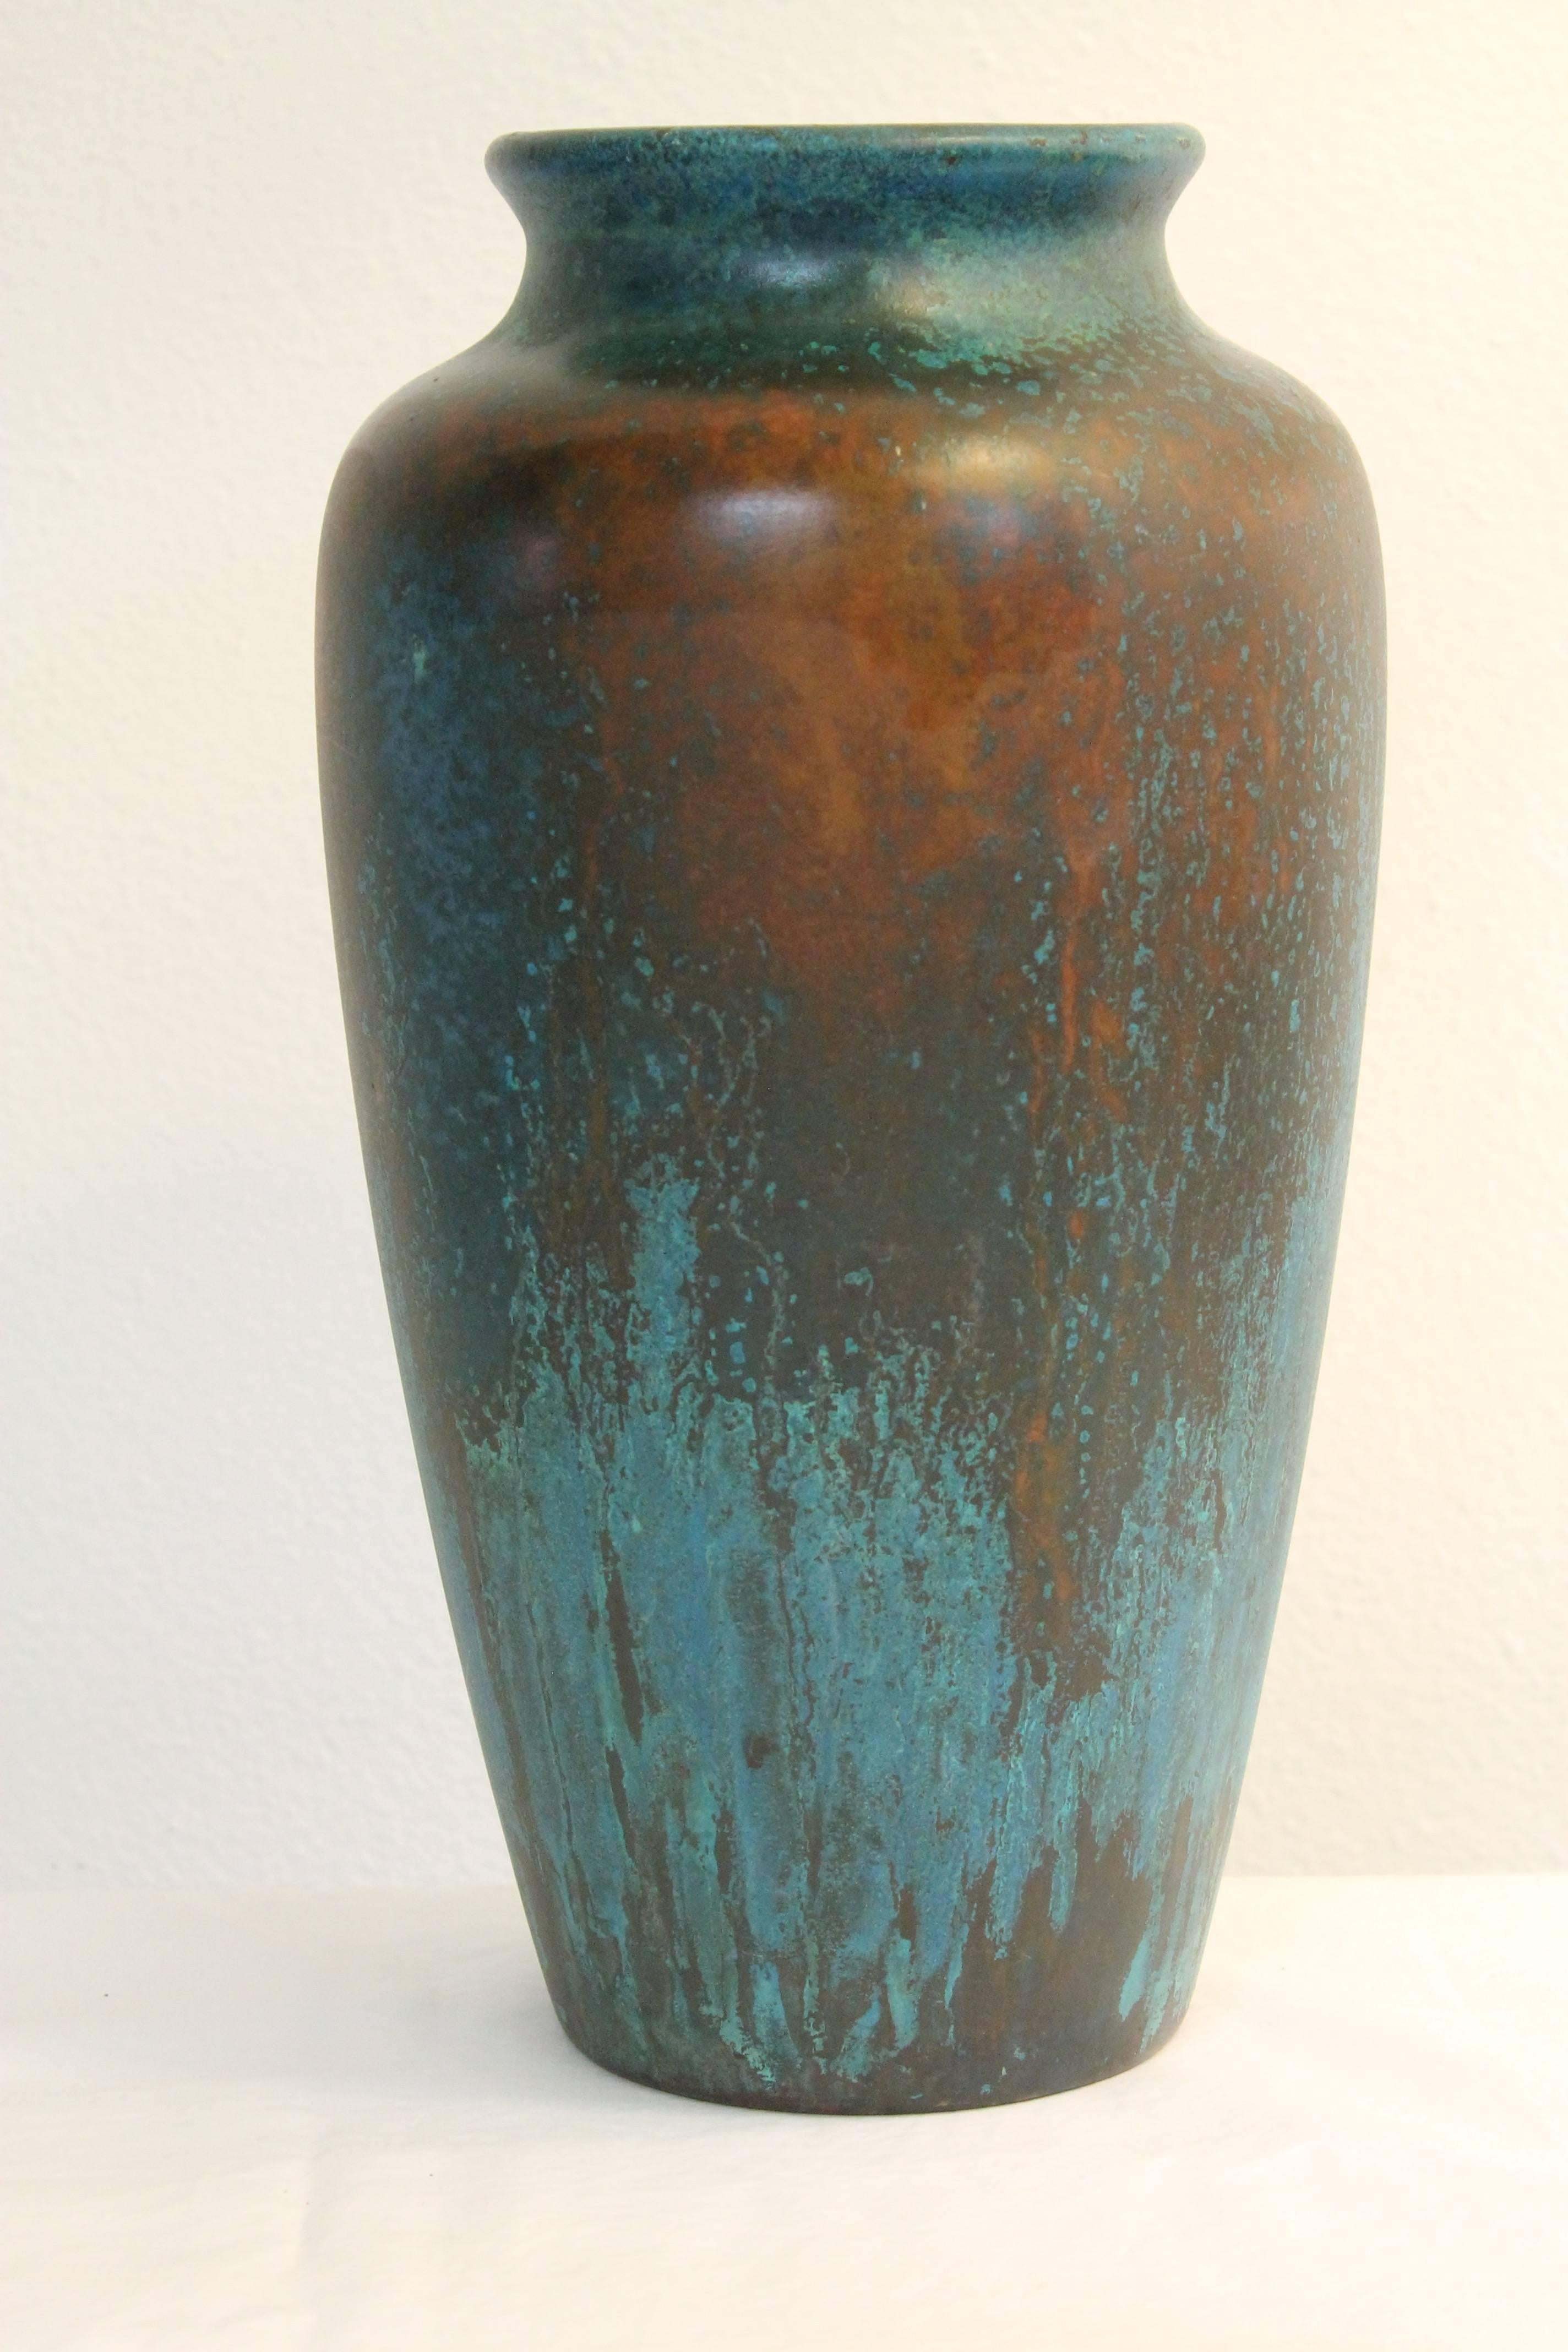 Vase by Charles Walter Clewell (1876 - 1965) of Canton, OH. Vase is copper clad and patinated. Clewell developed a secret technique for completely covering the exterior of a vase with a metal coating. Vase measures 14